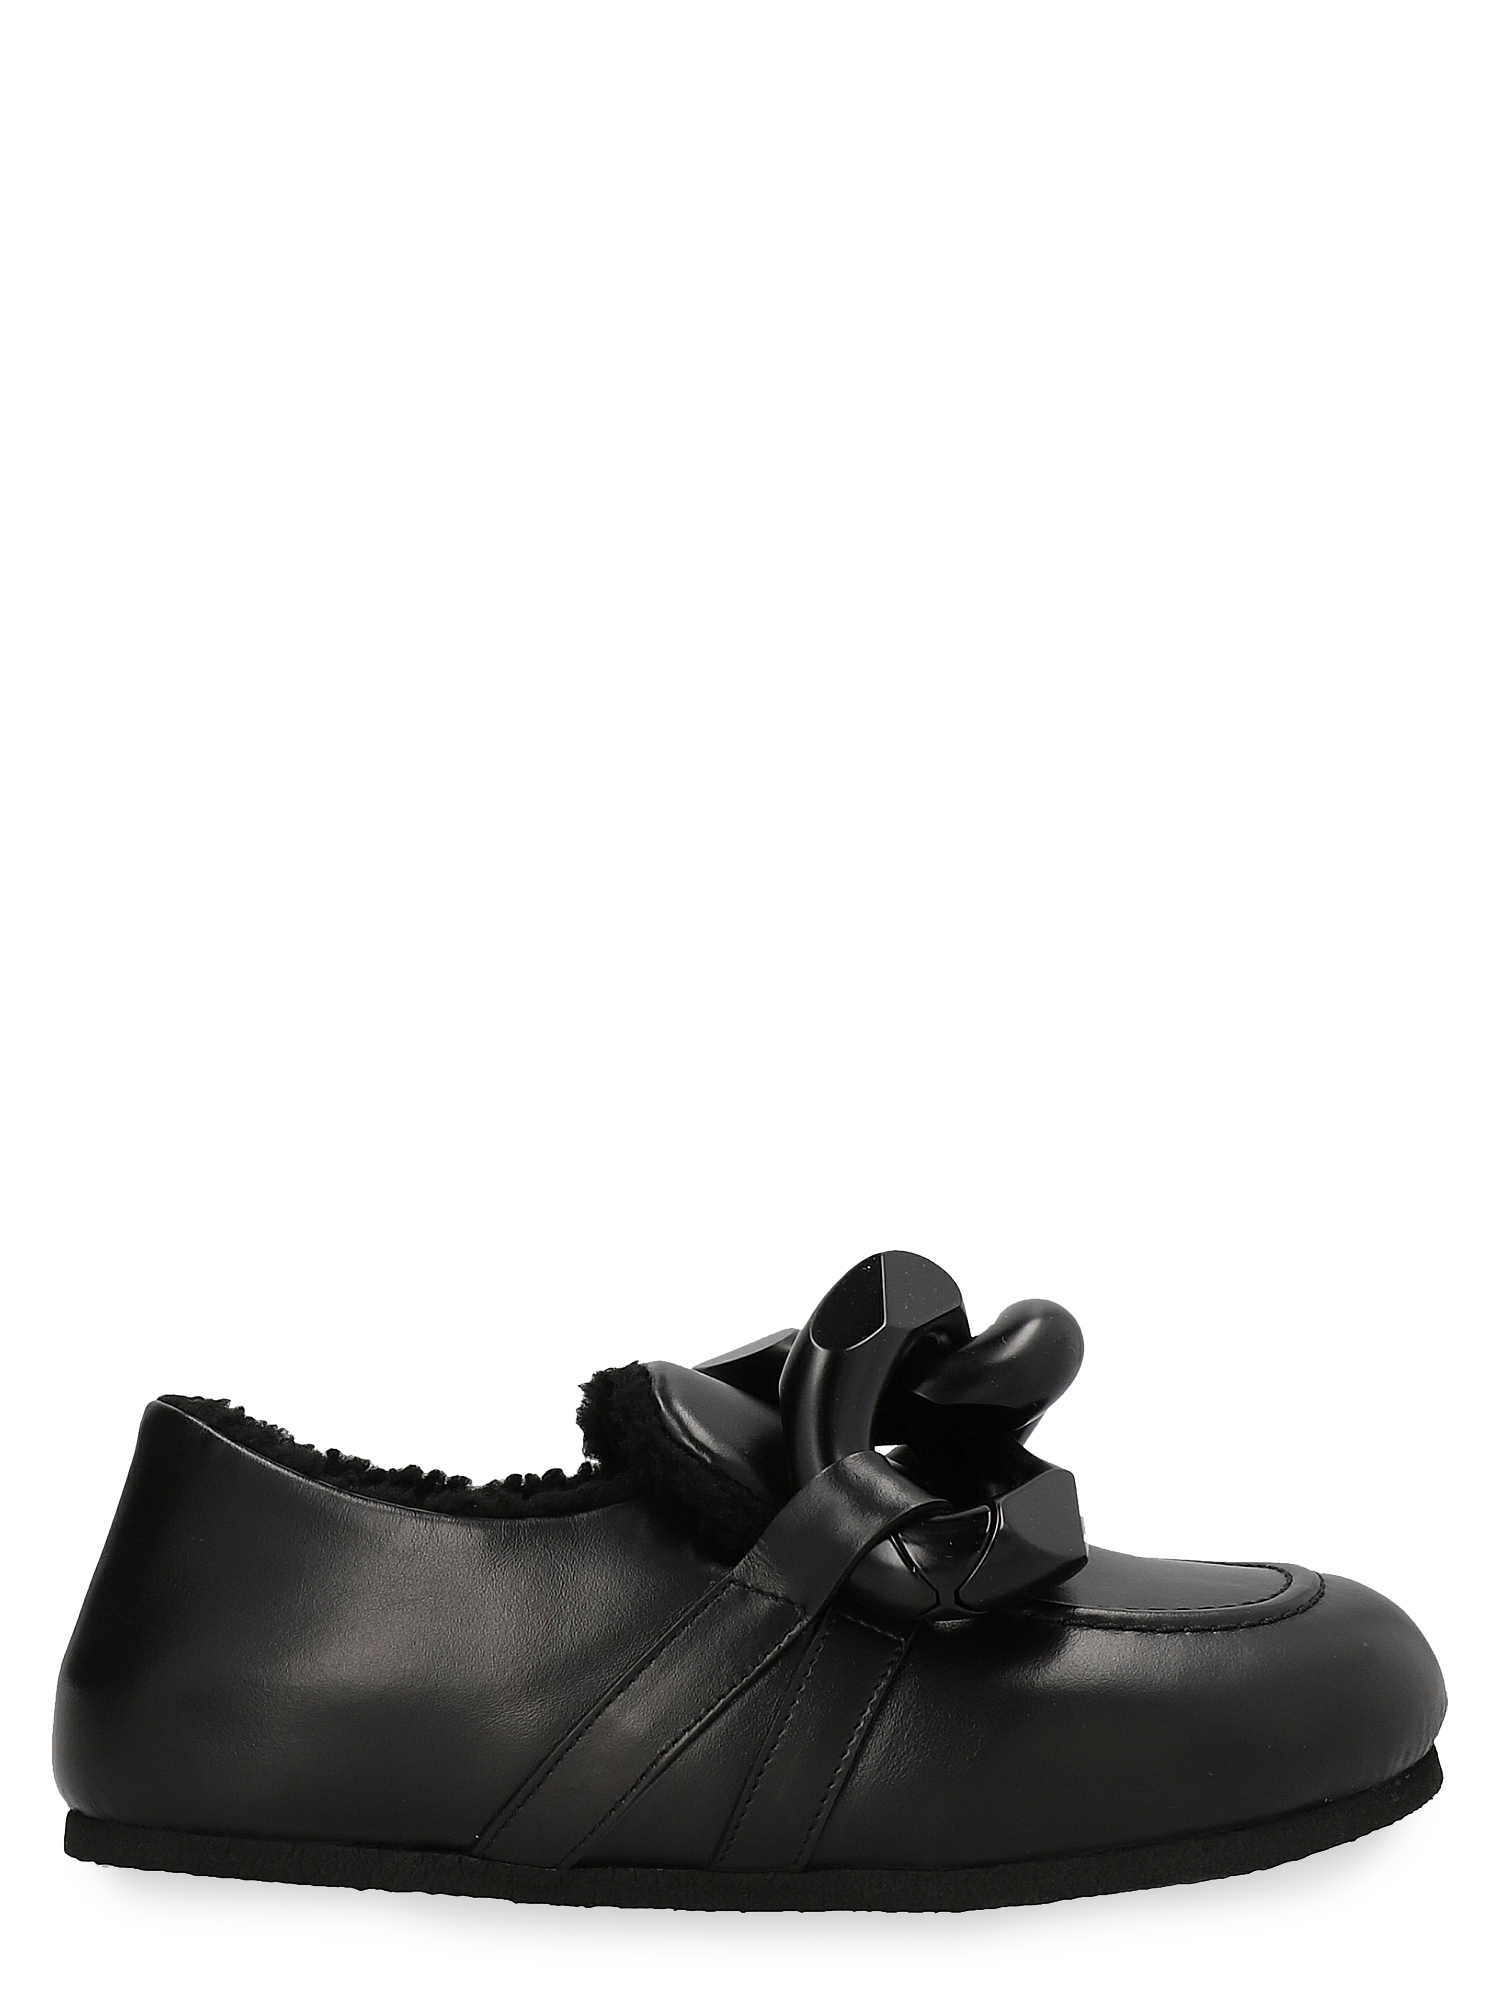 Women's Loafers - J.W. Anderson - In Black Leather